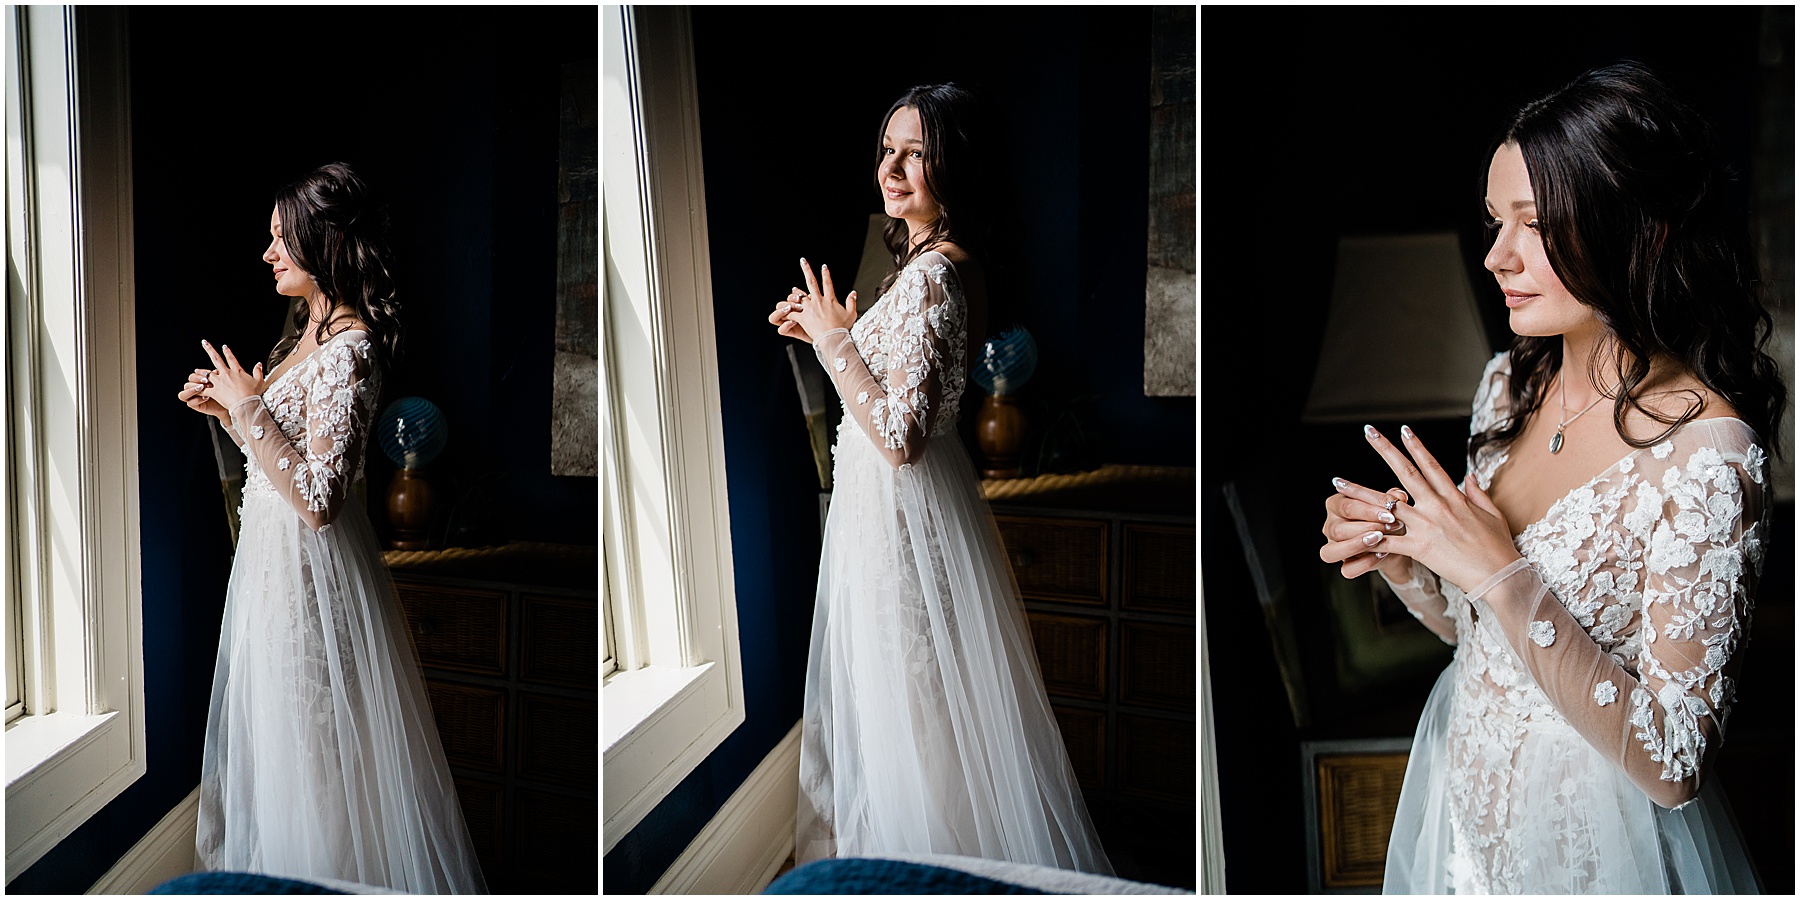 Fort Wayne wedding photographers capture bride playing with ring and looking outside window